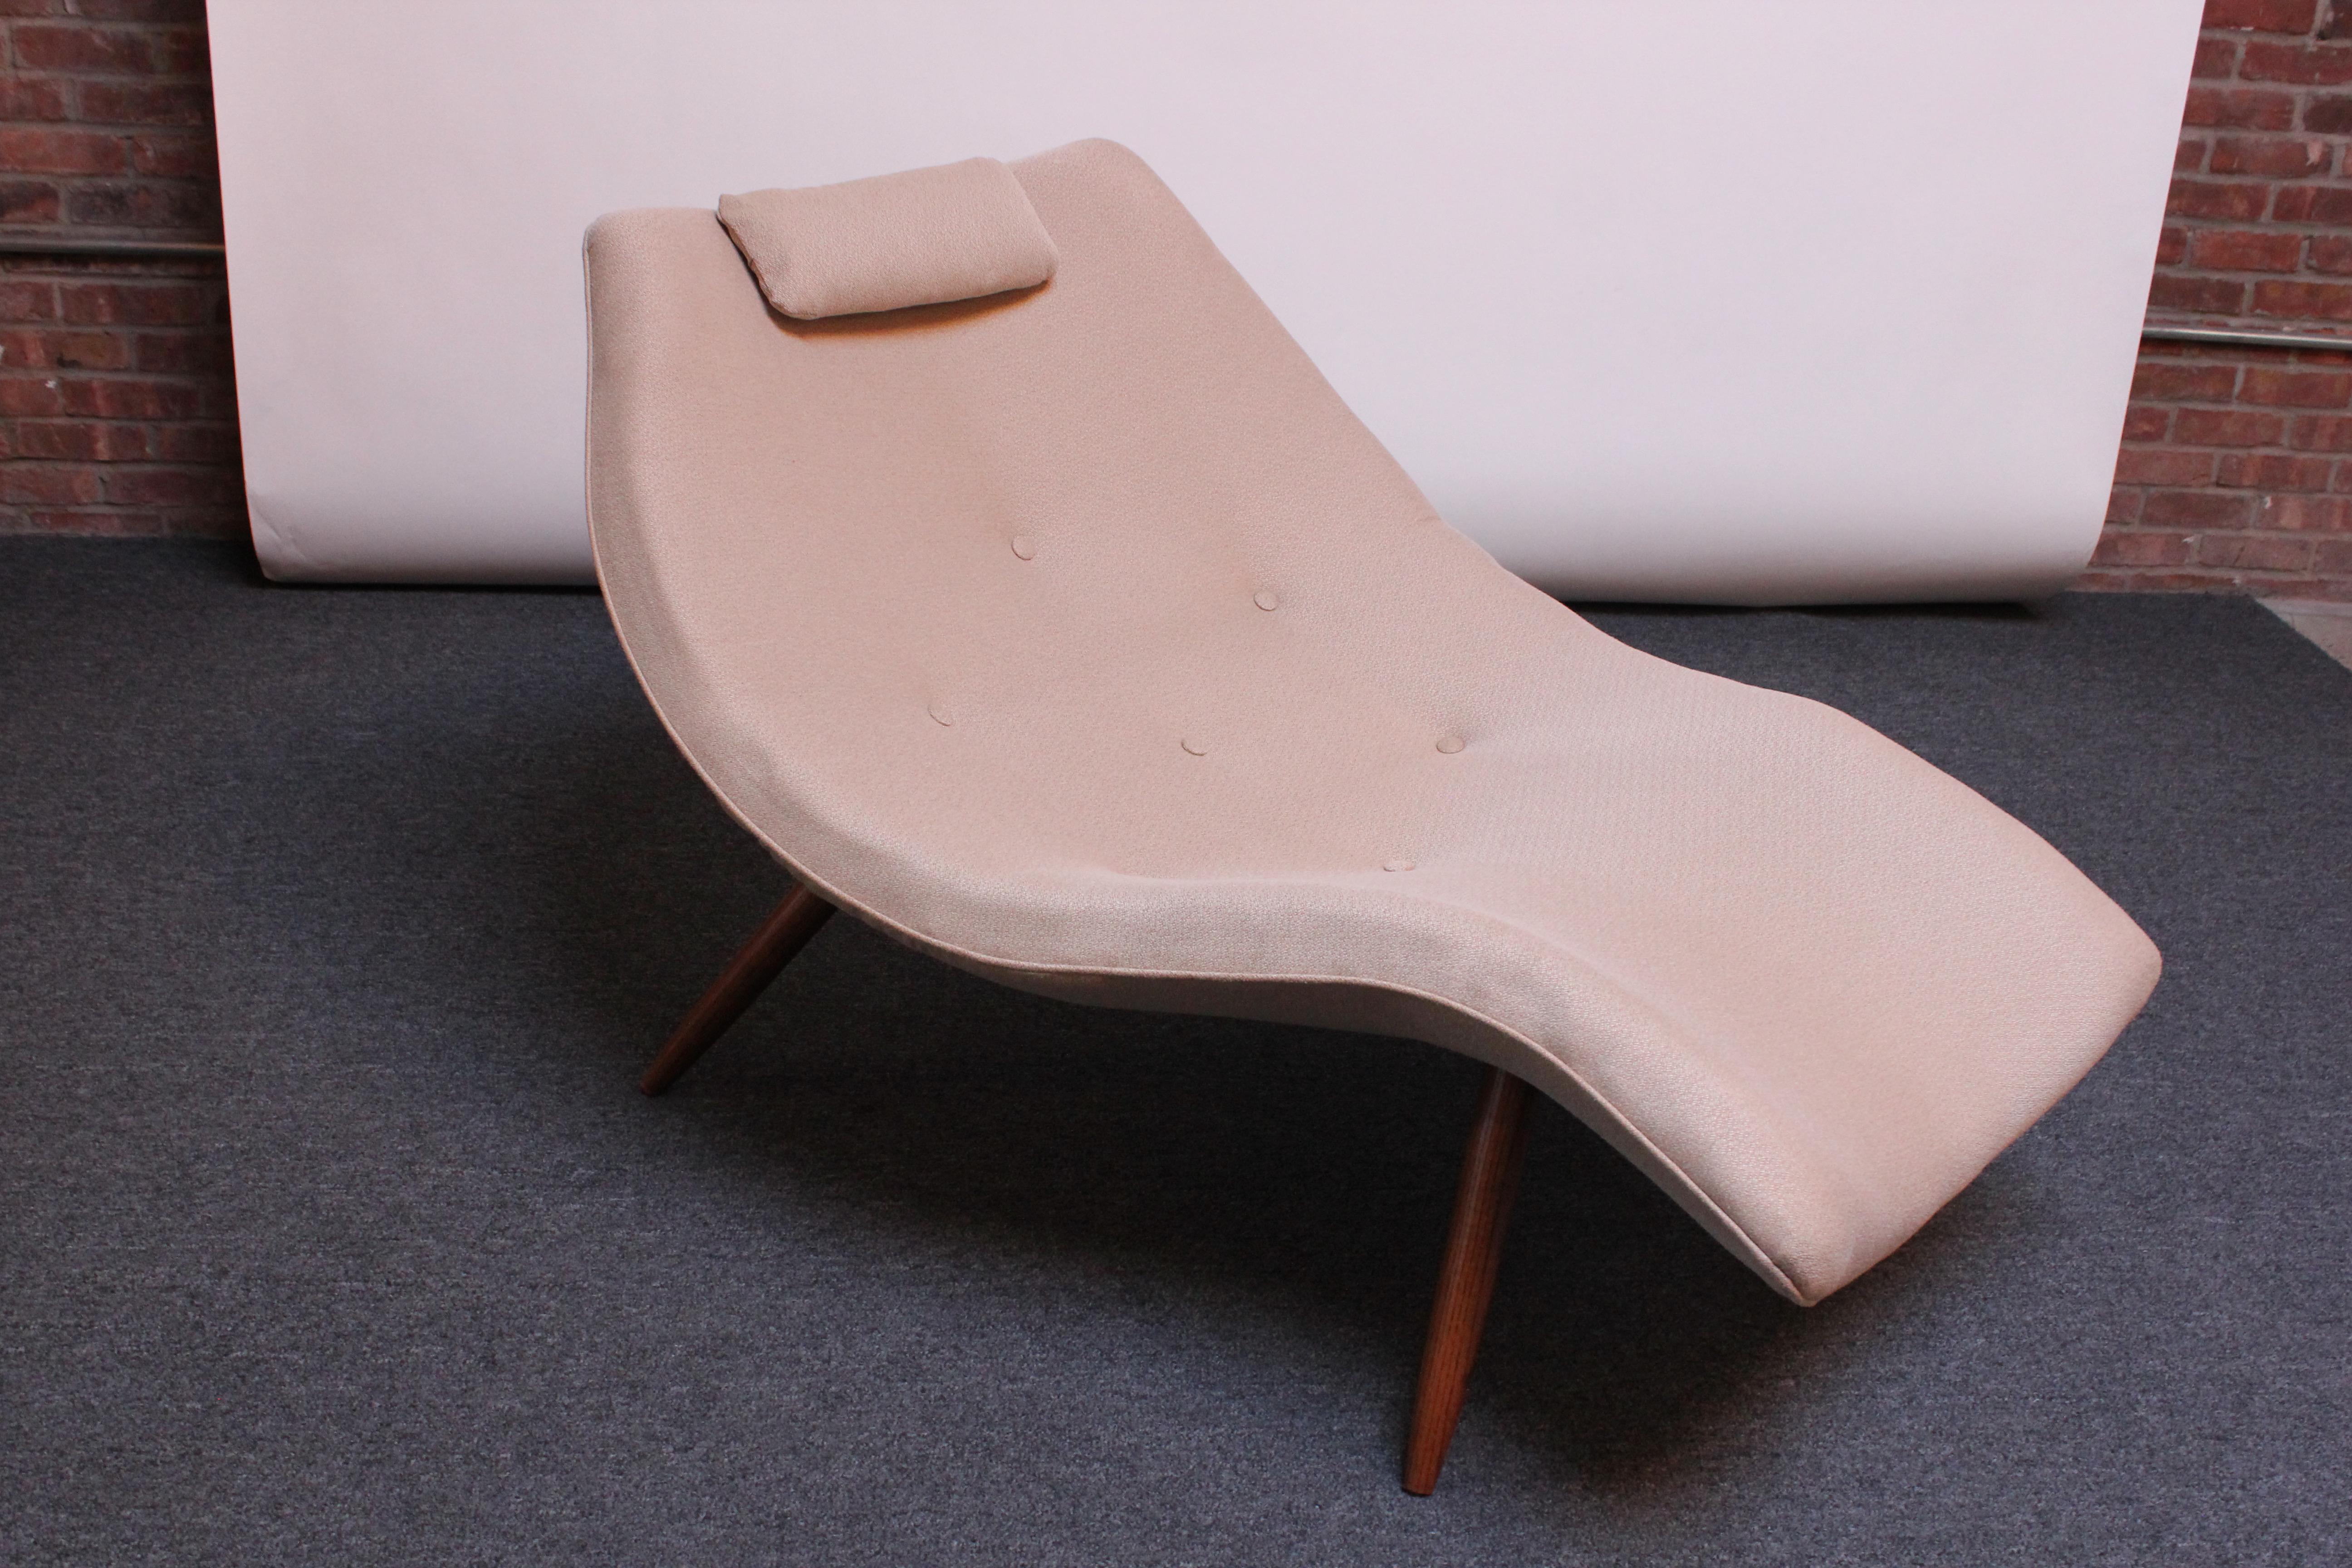 Scarce and desirable Model 1828-C Adrian Pearsall chaise lounge for Craft Associates (ca. 1950s, USA).
Composed of a deeply contoured, curvaceous seat equipped with the original, weighted head-rest, all supported by sculpted and splayed walnut